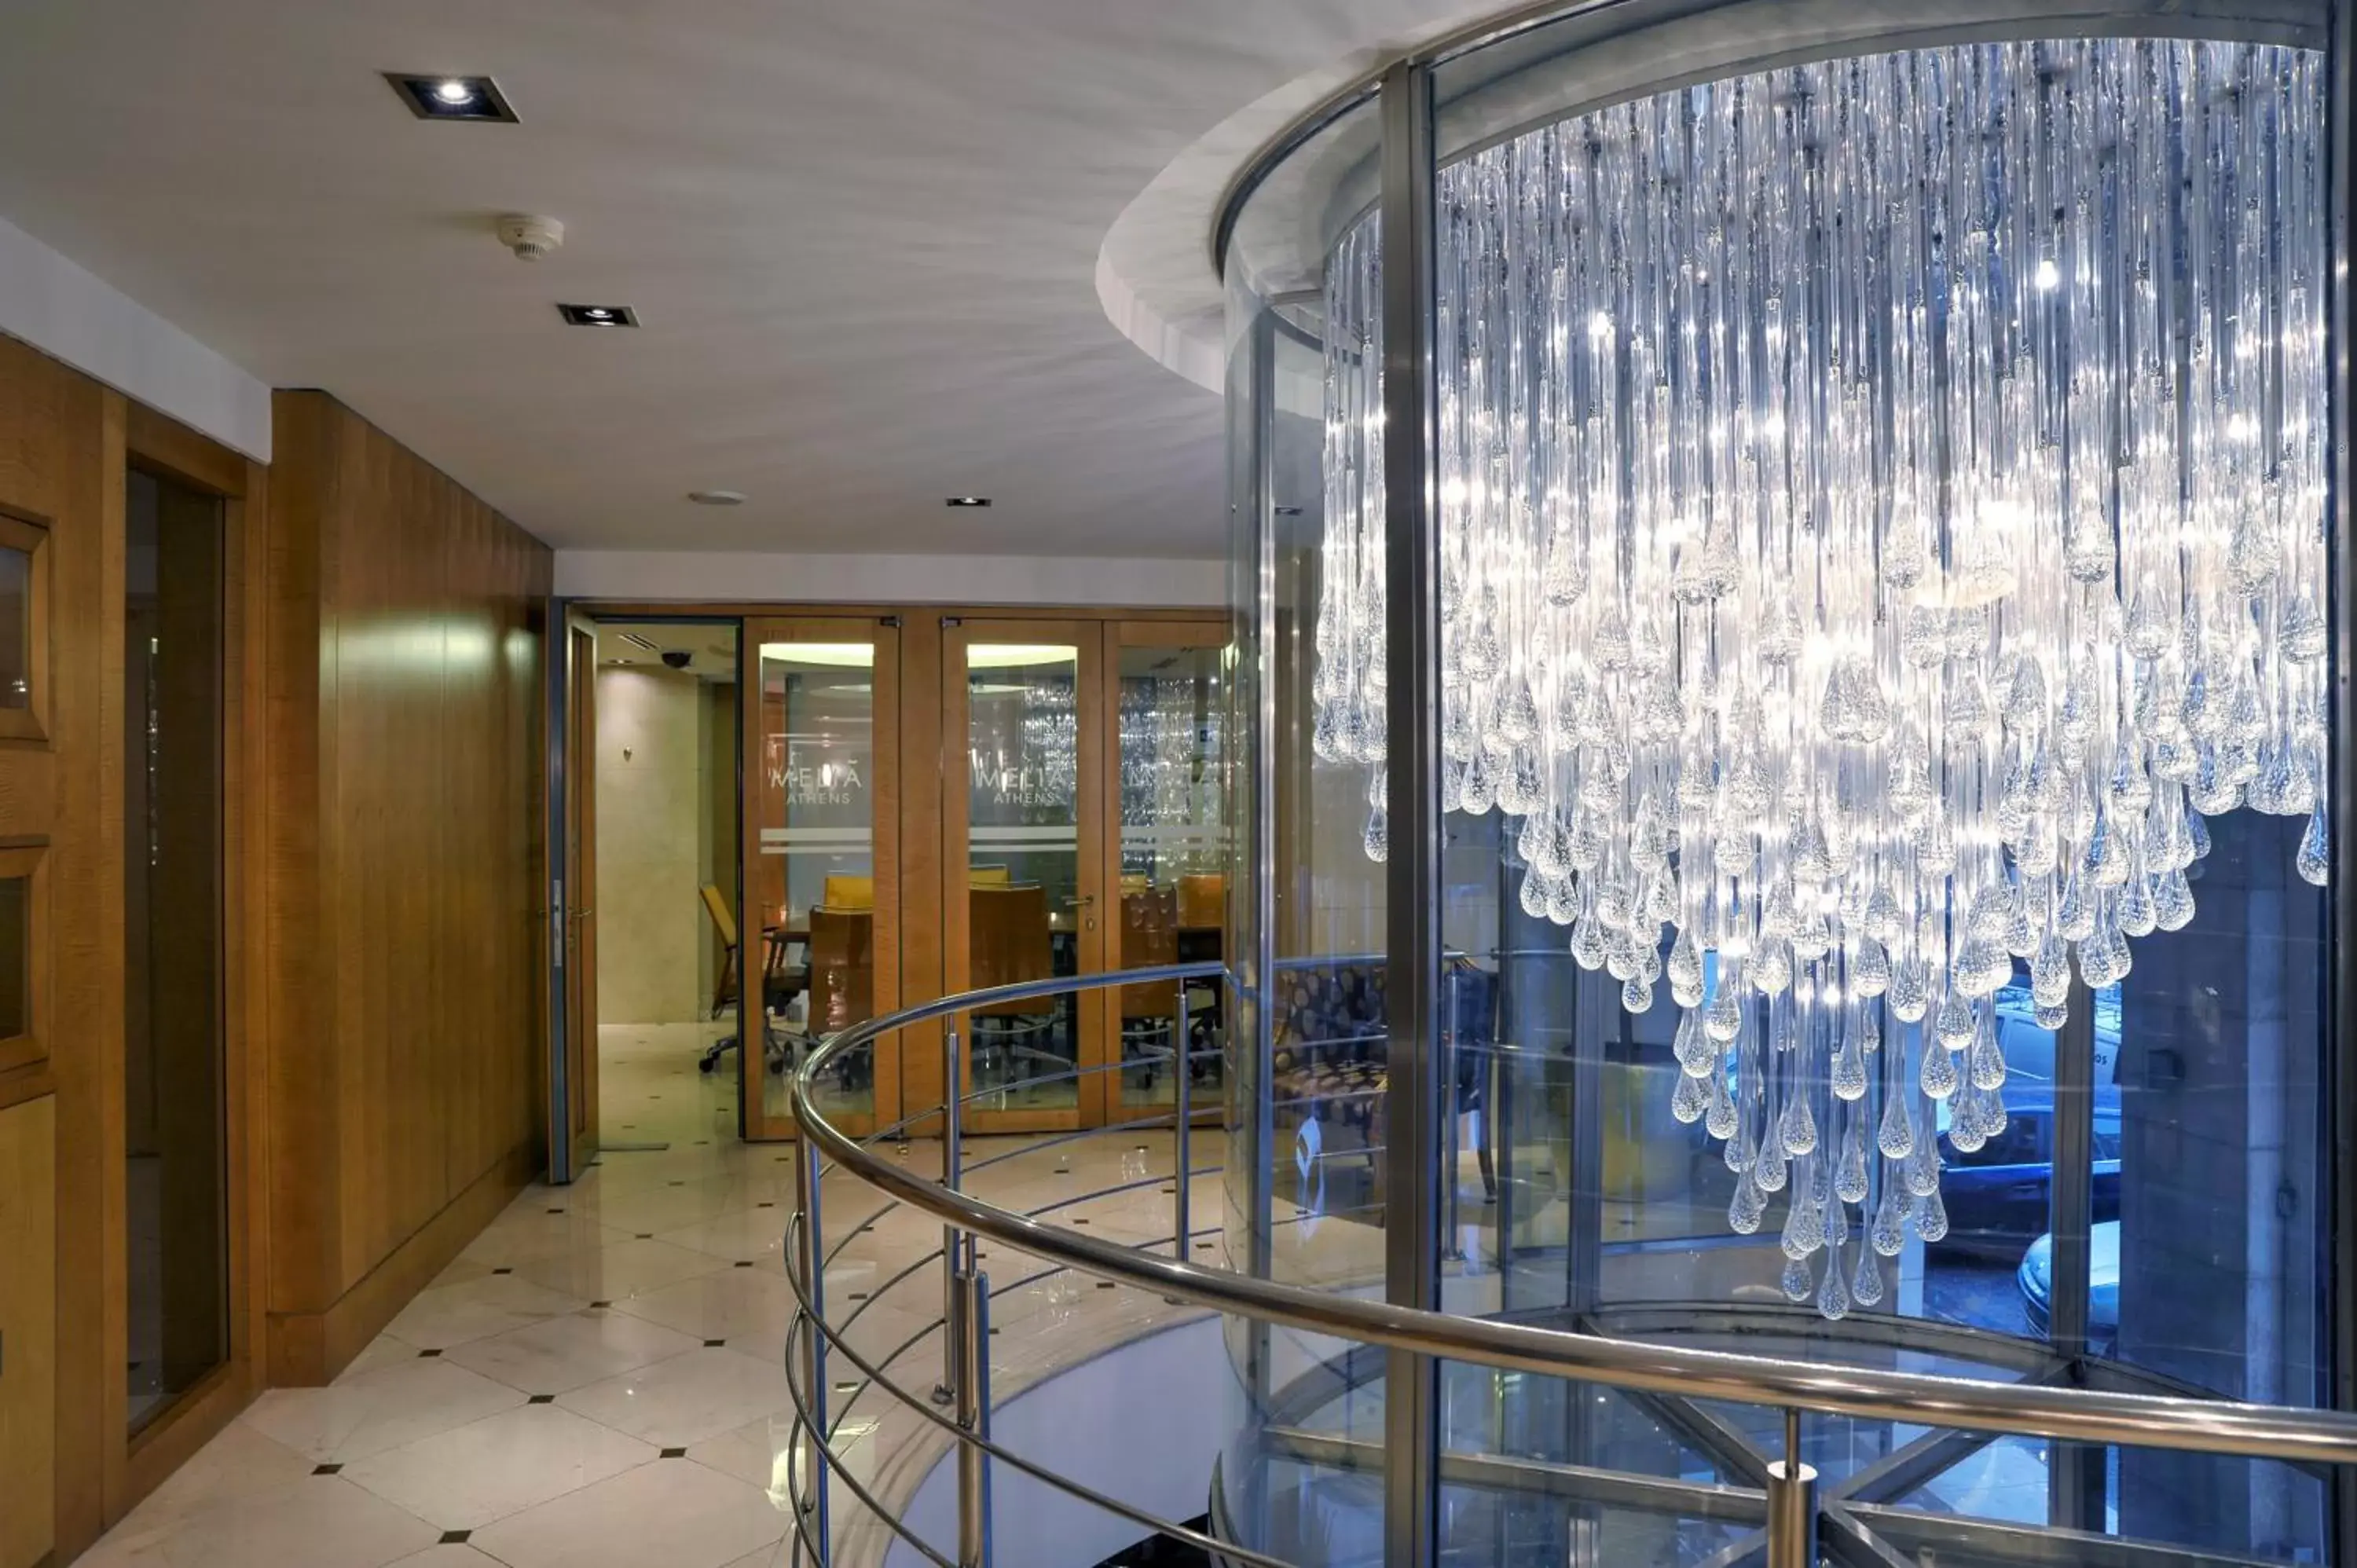 Lobby or reception in Melia Athens